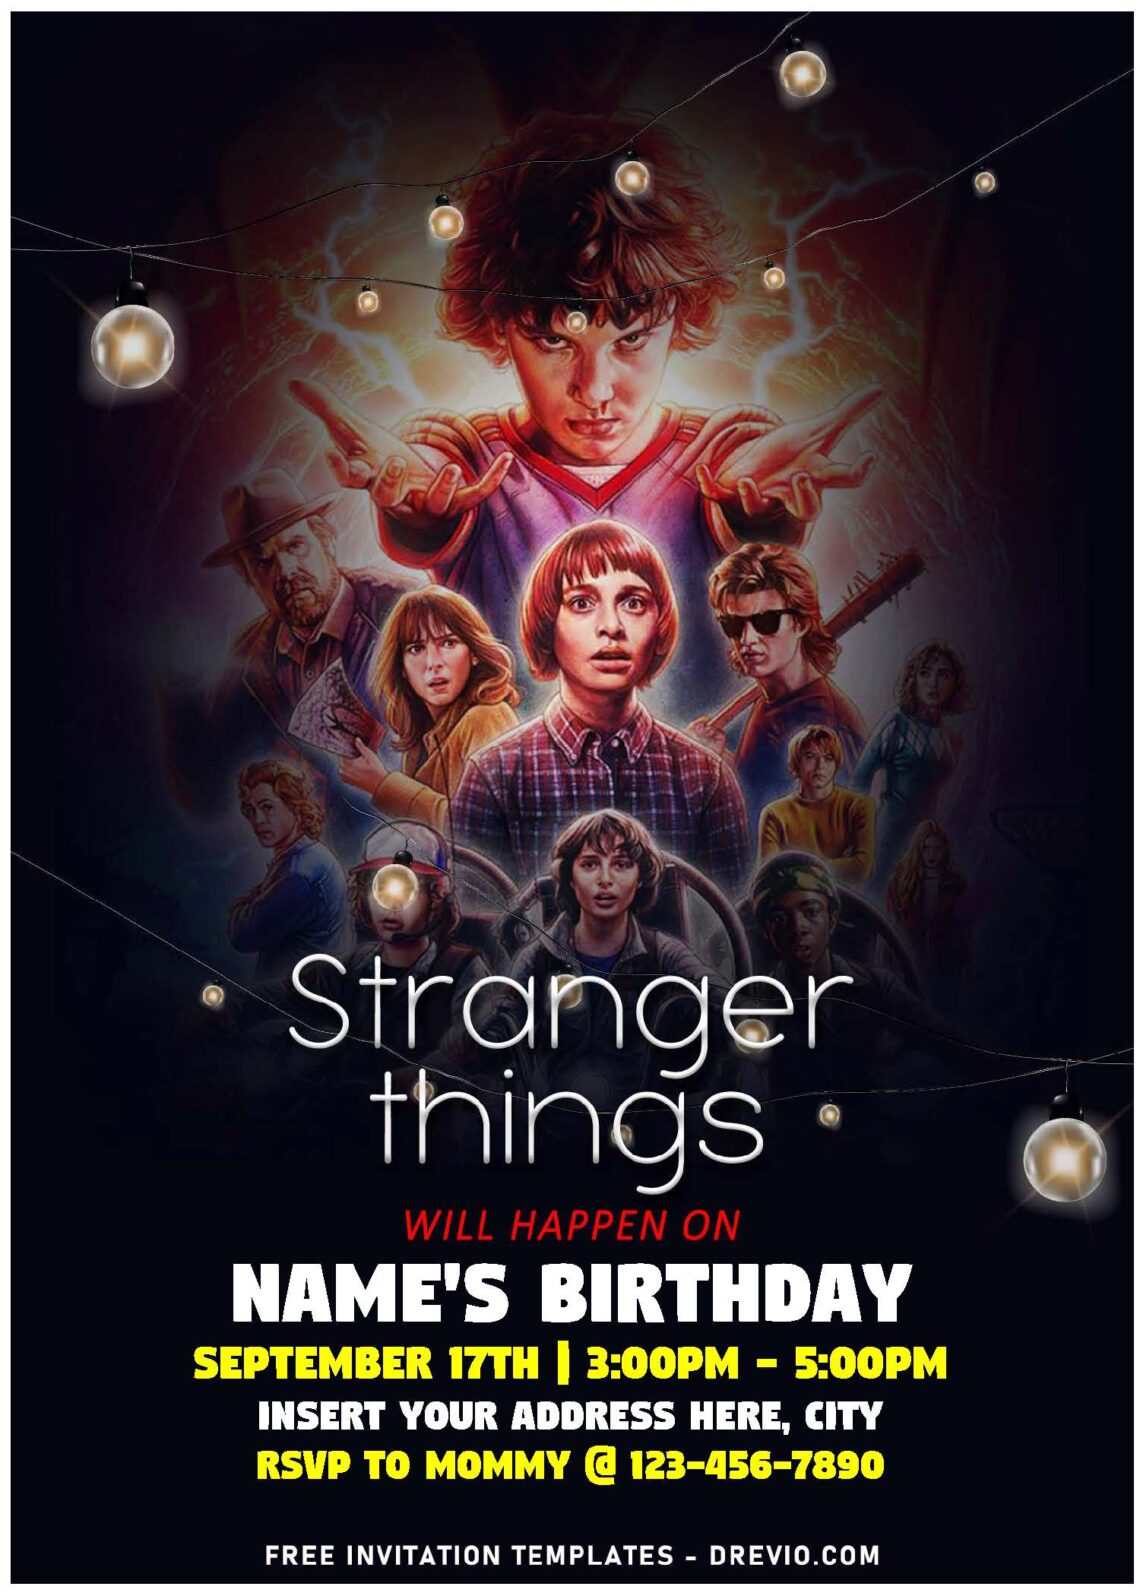 (Free Editable PDF) Awesome Stranger Things Sleepover Birthday Invitation Templates with Mike and Will